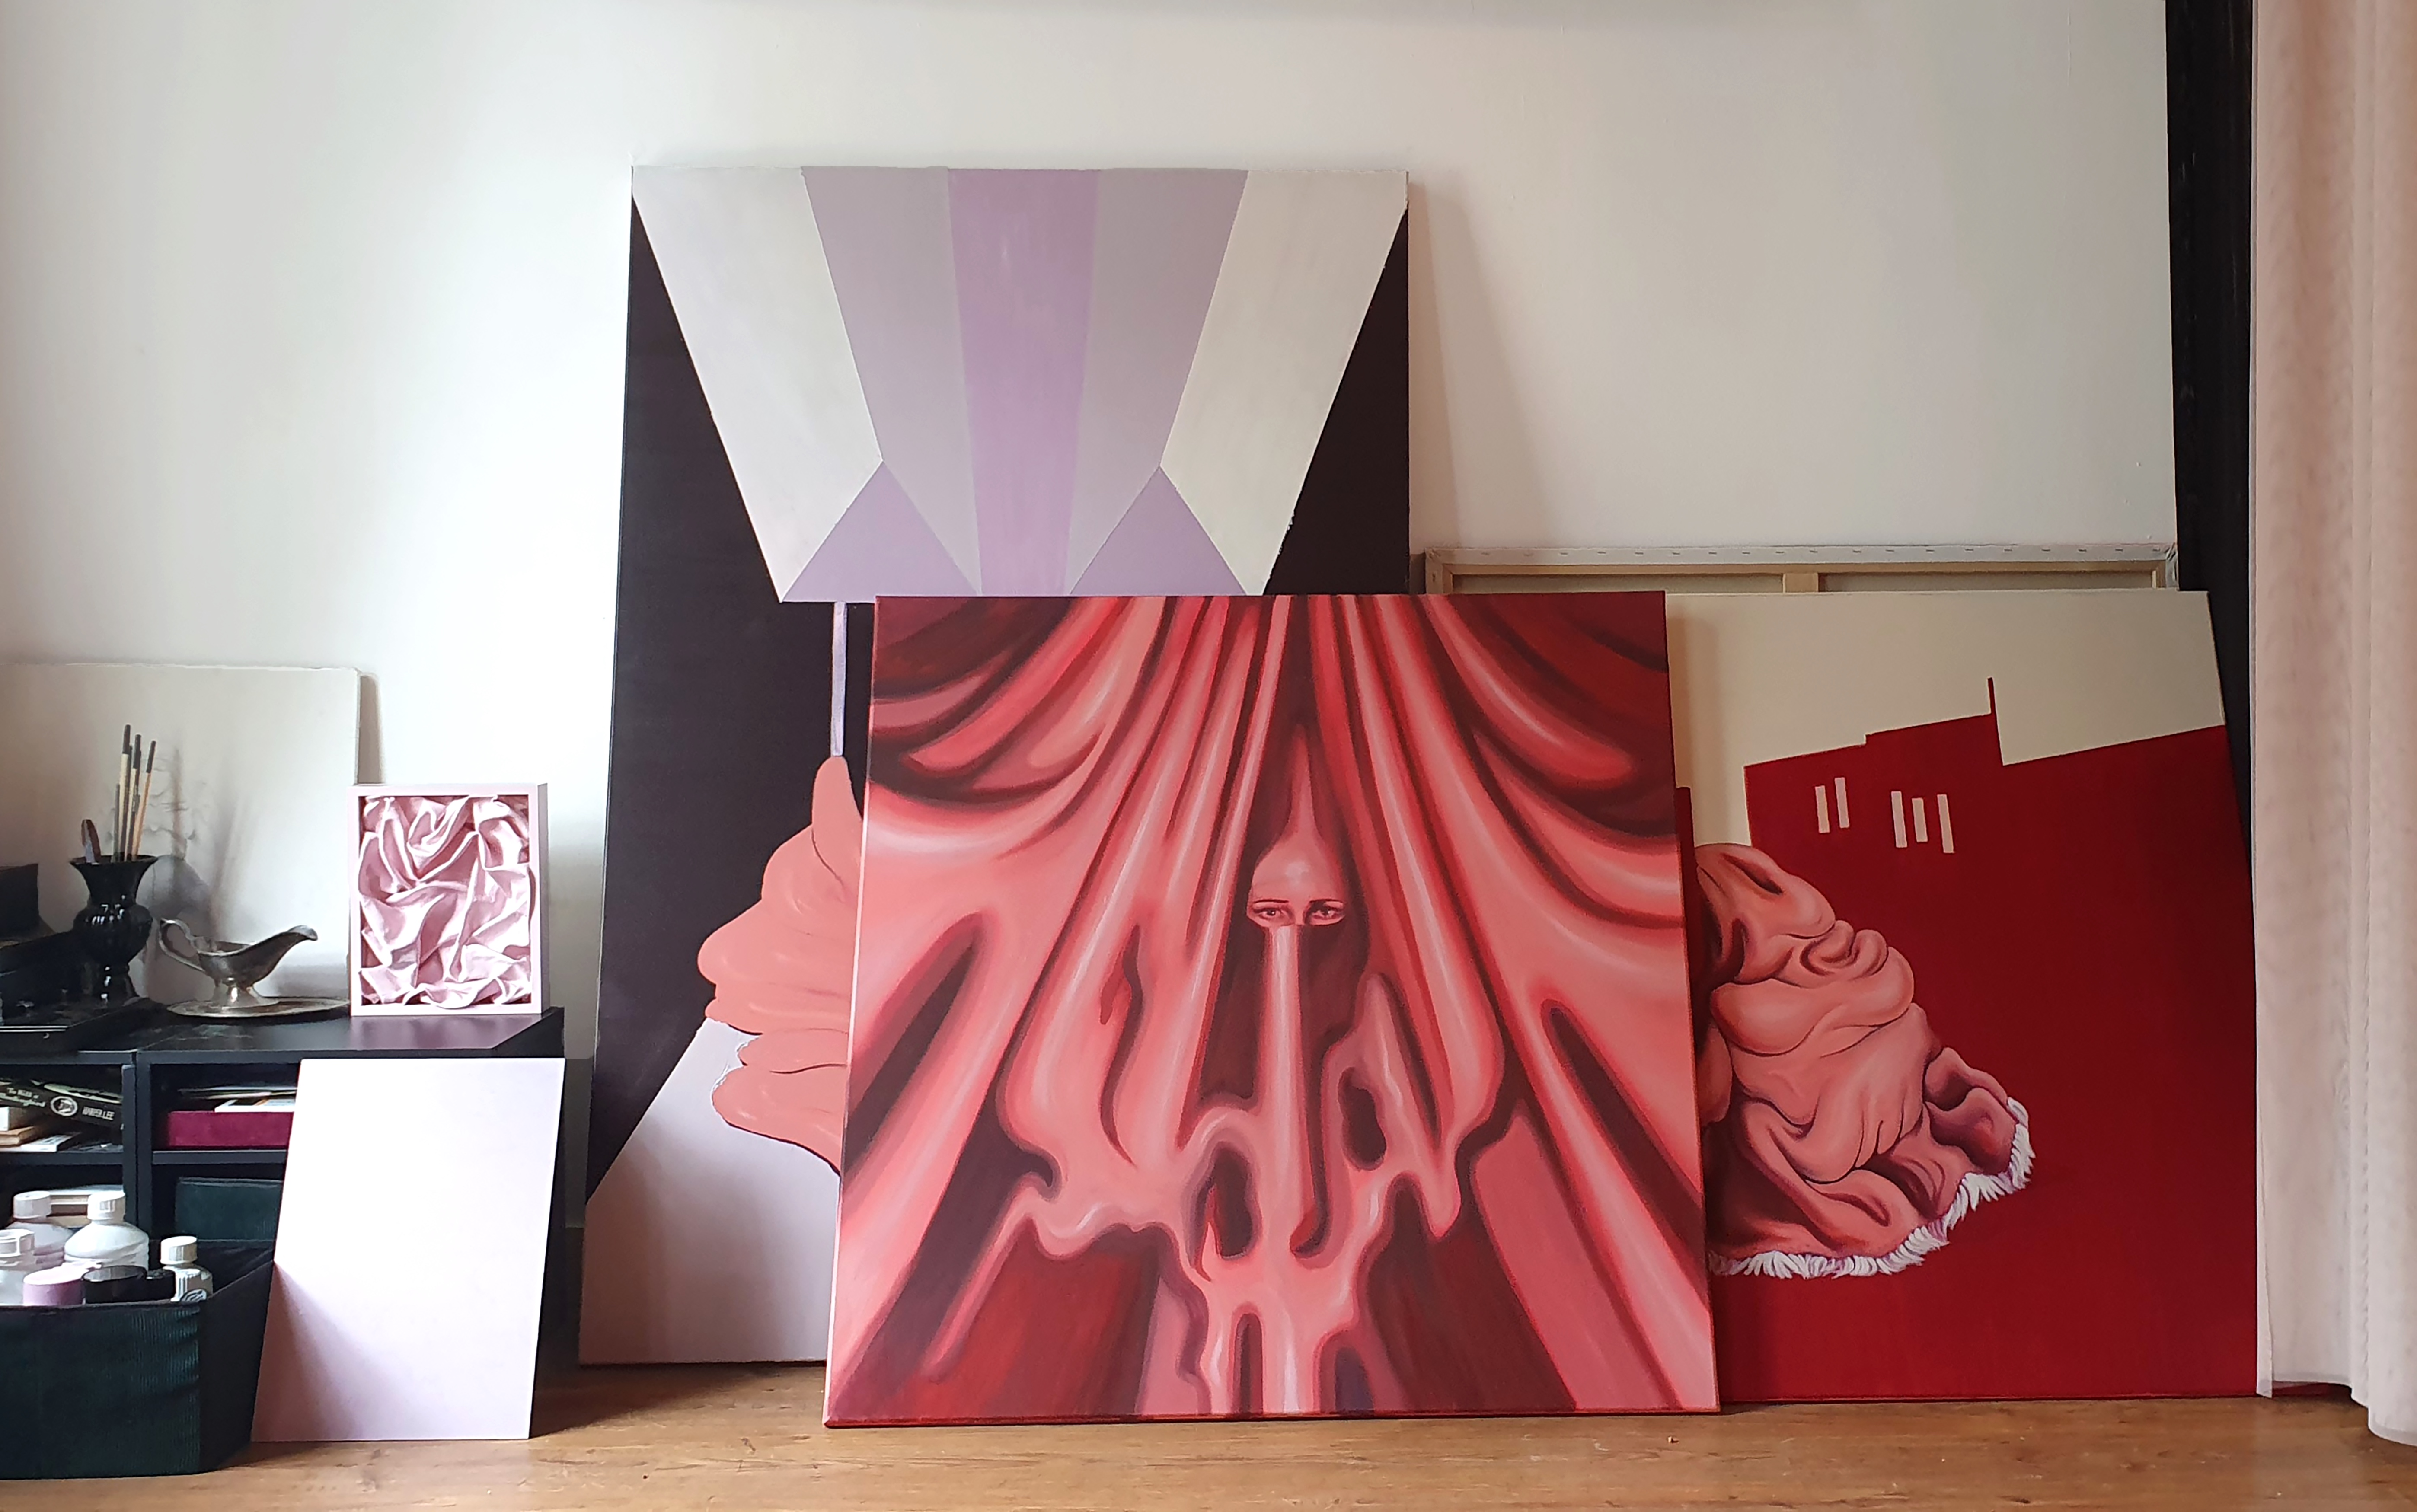 Photo of several pink, red, purple and black paintings against a white wall.